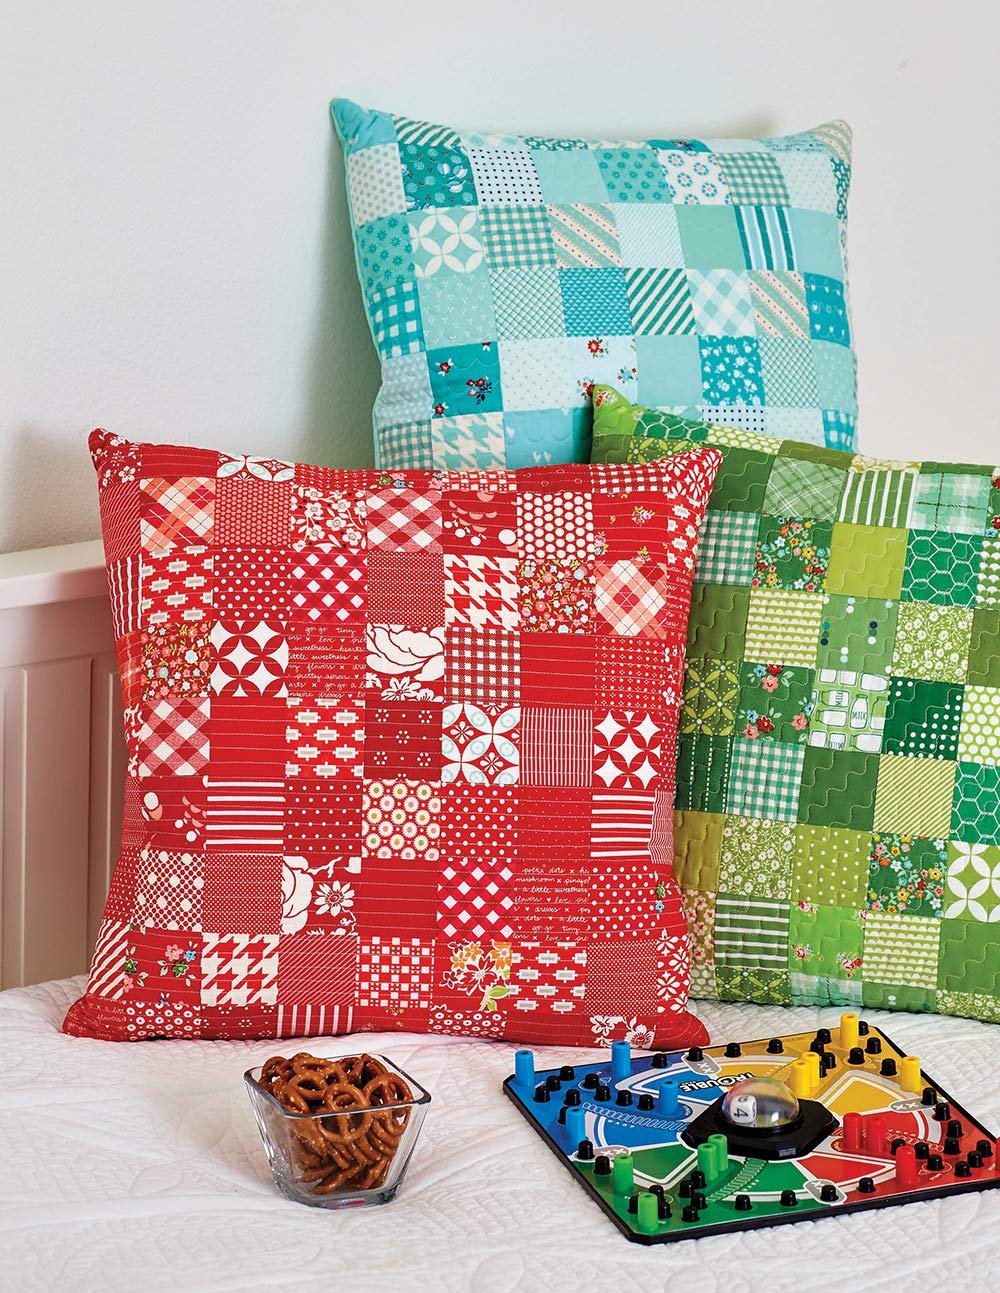 Welcome to Woodberry Way: An Inviting Collection of Delightful Quilts